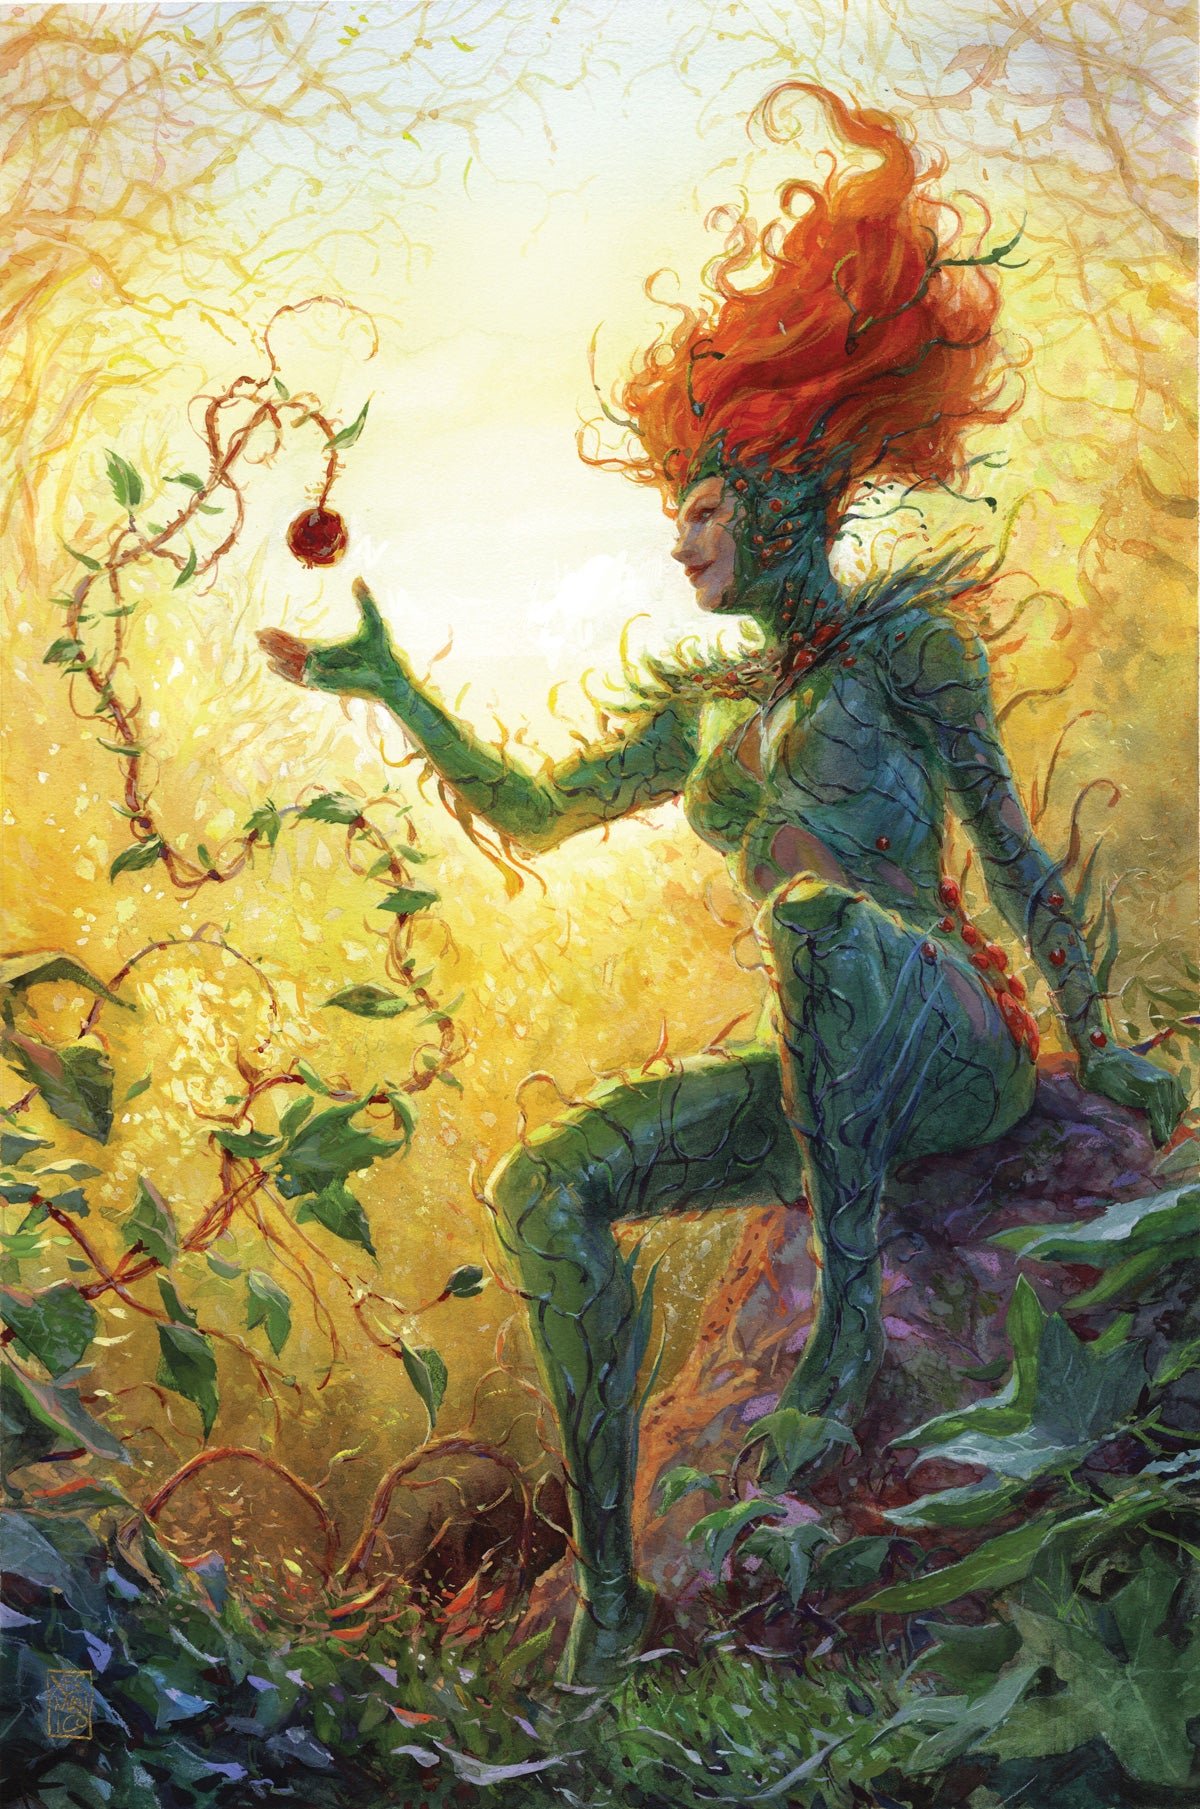 Poison Ivy #12 by Xermanico